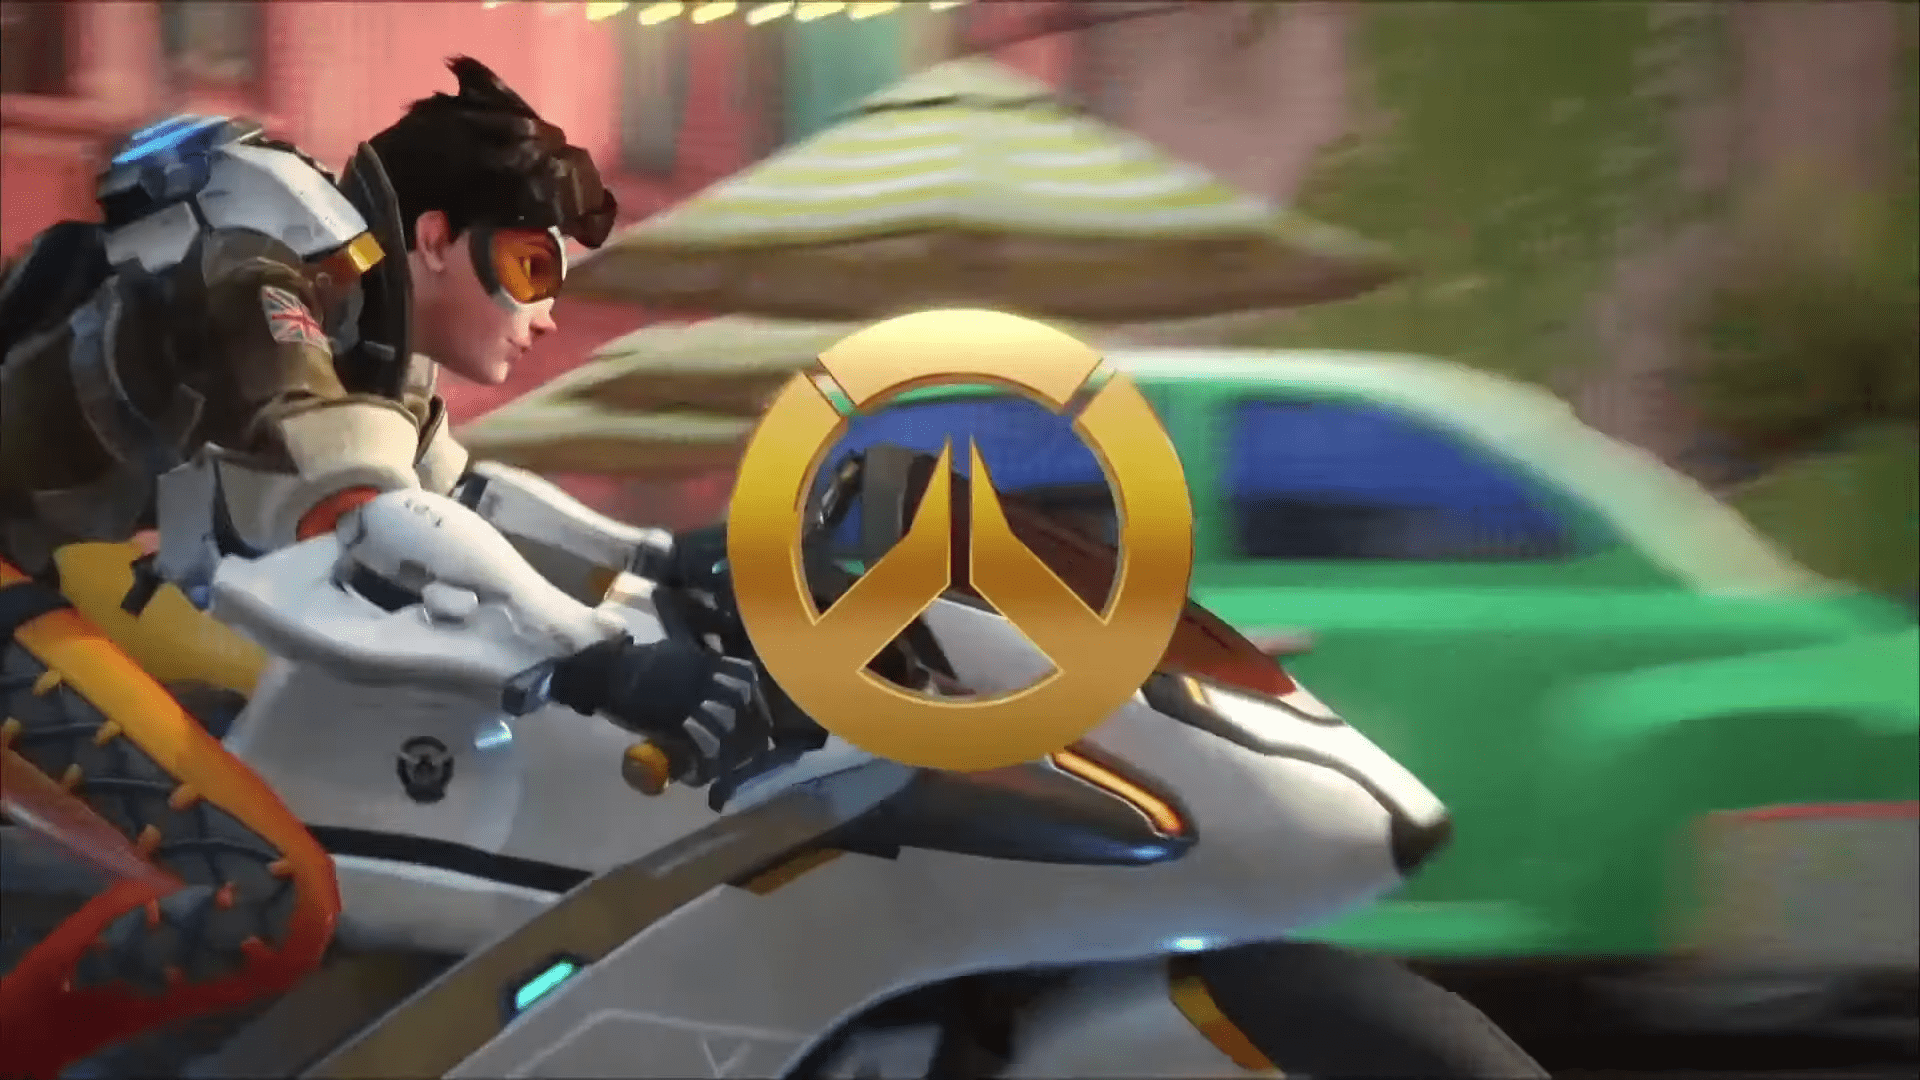 Overwatch League – Birdring Appears To Pass Out After LA Gladiators Versus Toronto Defiance